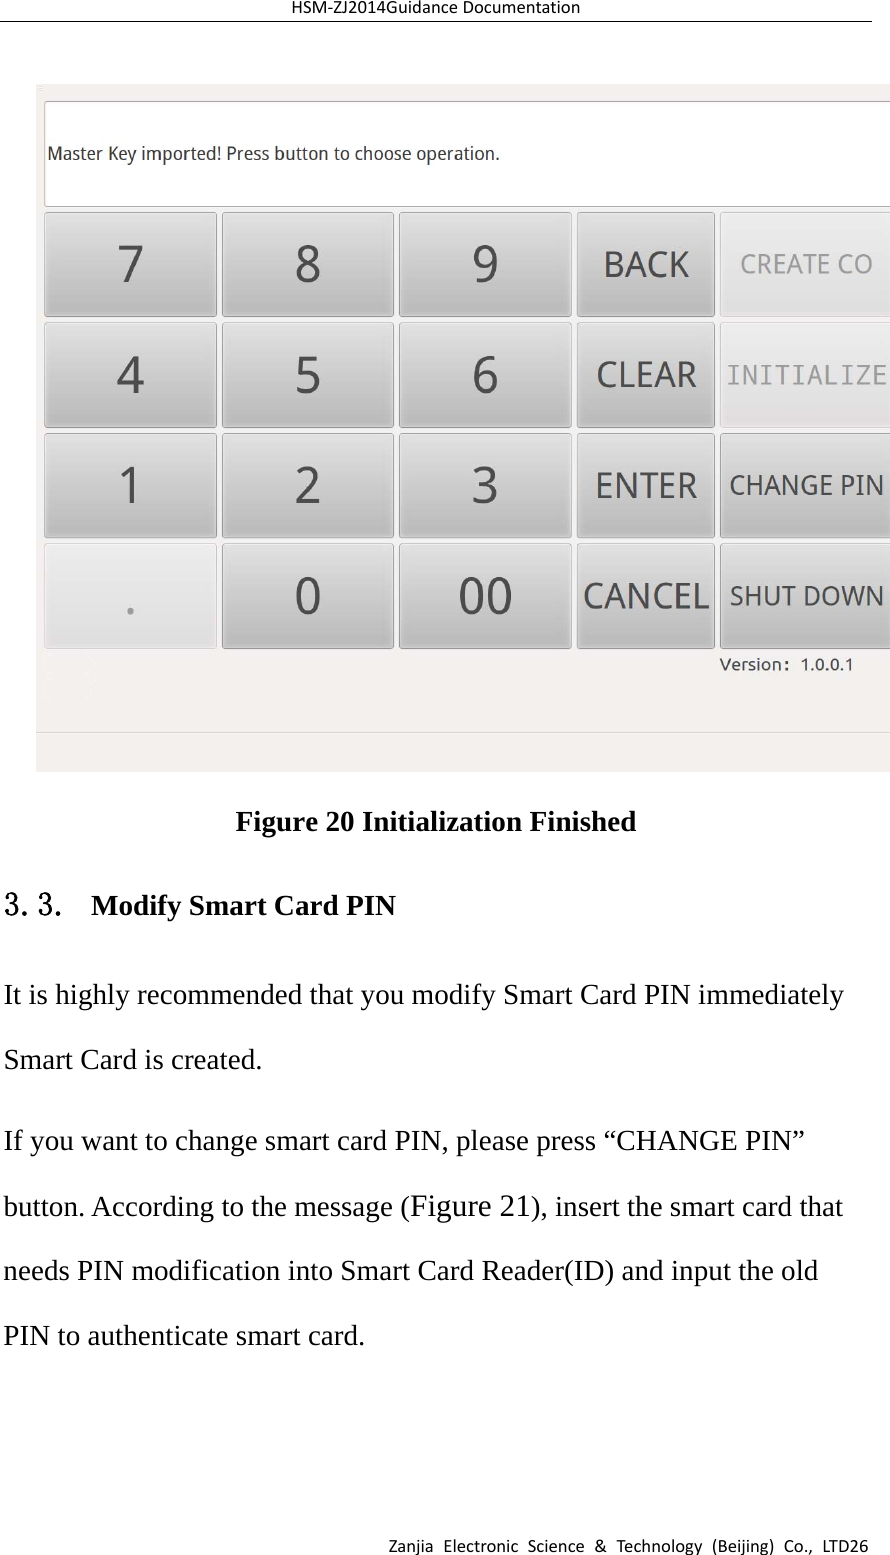 HSM‐ZJ2014GuidanceDocumentationZanjiaElectronicScience&amp;Technology(Beijing)Co.,LTD26 Figure 20 Initialization Finished 3.3. Modify Smart Card PIN It is highly recommended that you modify Smart Card PIN immediately Smart Card is created. If you want to change smart card PIN, please press “CHANGE PIN” button. According to the message (Figure 21), insert the smart card that needs PIN modification into Smart Card Reader(ID) and input the old PIN to authenticate smart card. 